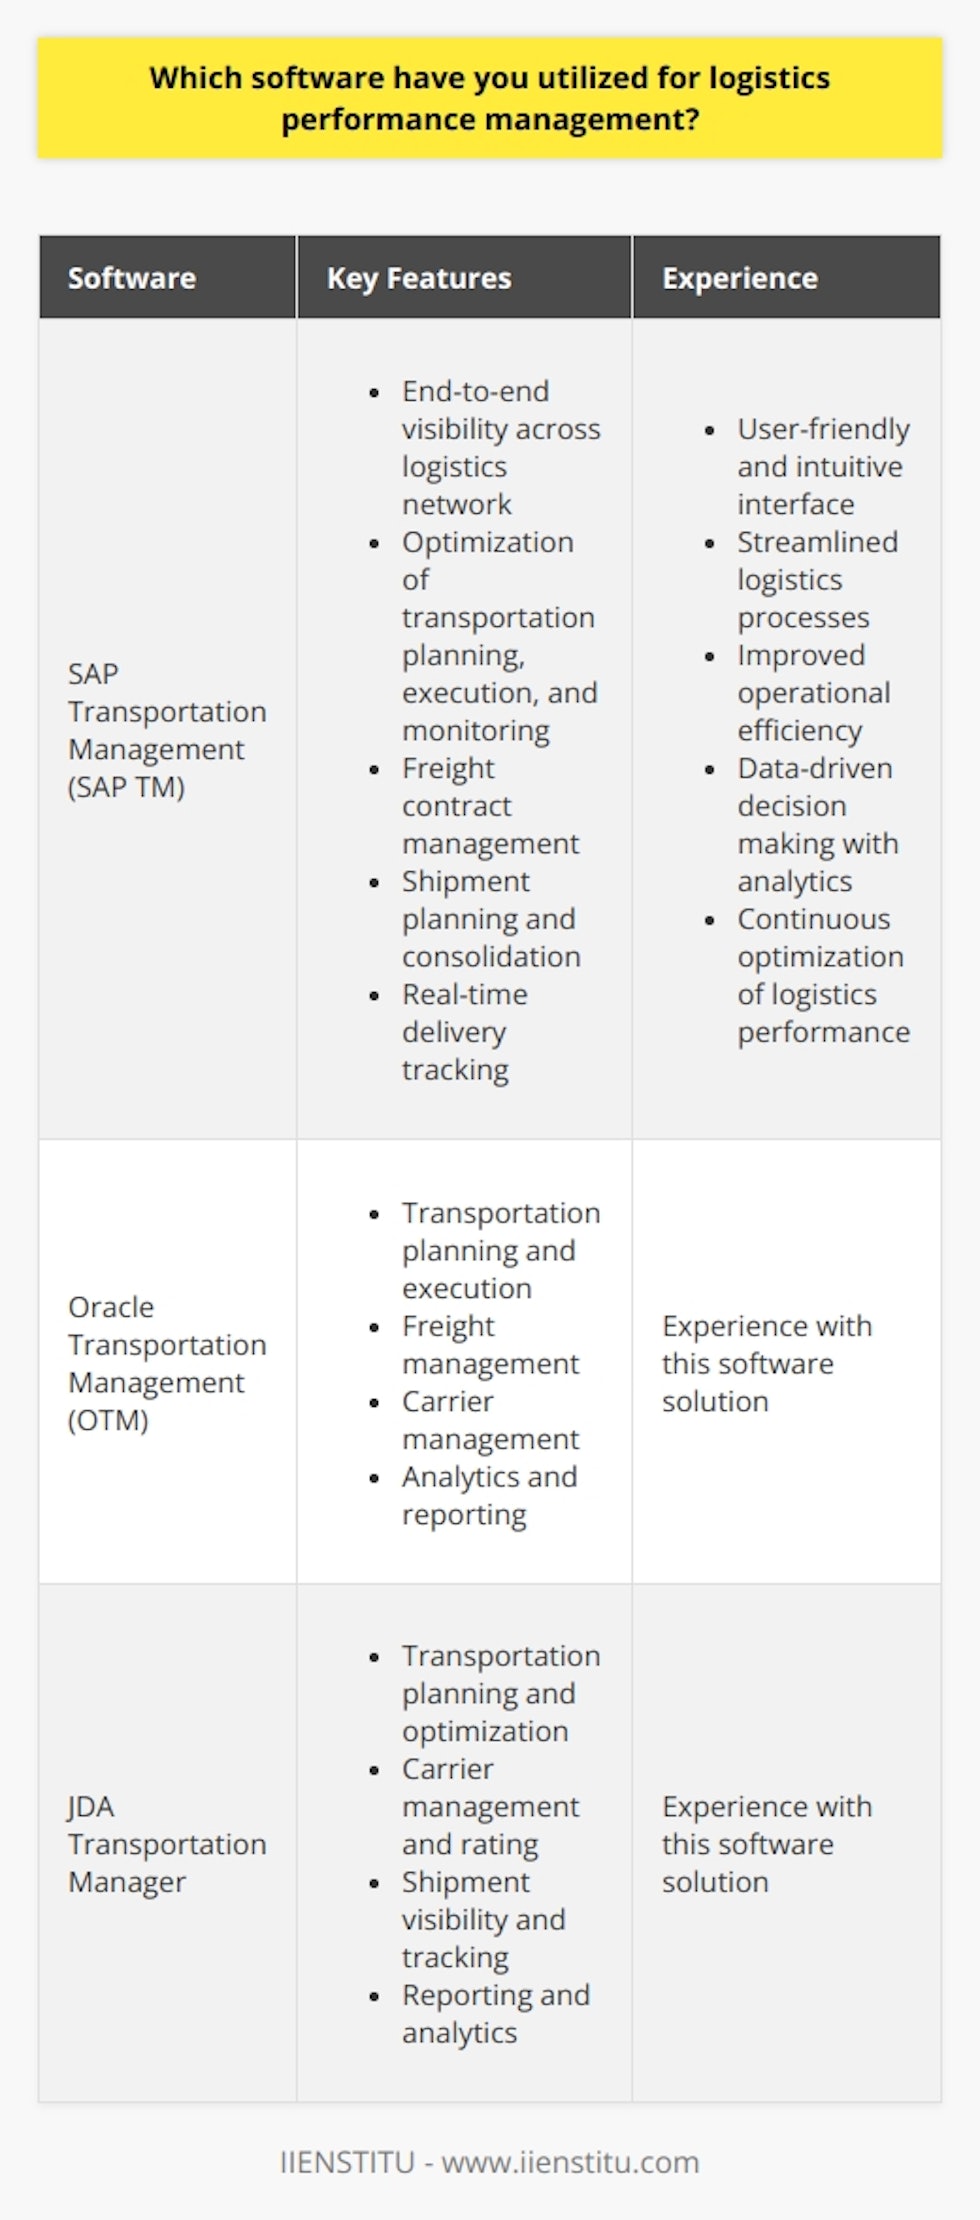 Throughout my career, I have utilized various software solutions for logistics performance management. One of the most comprehensive and powerful tools Ive used is SAP Transportation Management (SAP TM). SAP Transportation Management (SAP TM) SAP TM provided me with end-to-end visibility across the entire logistics network. It enabled me to optimize transportation planning, execution, and monitoring. With SAP TM, I could efficiently manage freight contracts, plan and consolidate shipments, and track deliveries in real-time. Key Features of SAP TM I found SAP TM to be incredibly user-friendly and intuitive. It streamlined our logistics processes and significantly improved our operational efficiency. The real-time visibility and analytics provided by SAP TM allowed us to make data-driven decisions and continuously optimize our logistics performance. Other Logistics Software Experience In addition to SAP TM, I have also worked with other logistics software solutions such as Oracle Transportation Management (OTM) and JDA Transportation Manager. While each software has its own strengths and weaknesses, I found SAP TM to be the most comprehensive and suitable for our specific needs. Overall, my experience with logistics performance management software has been extremely positive. These tools have empowered me to drive efficiency, reduce costs, and enhance customer satisfaction throughout the supply chain.